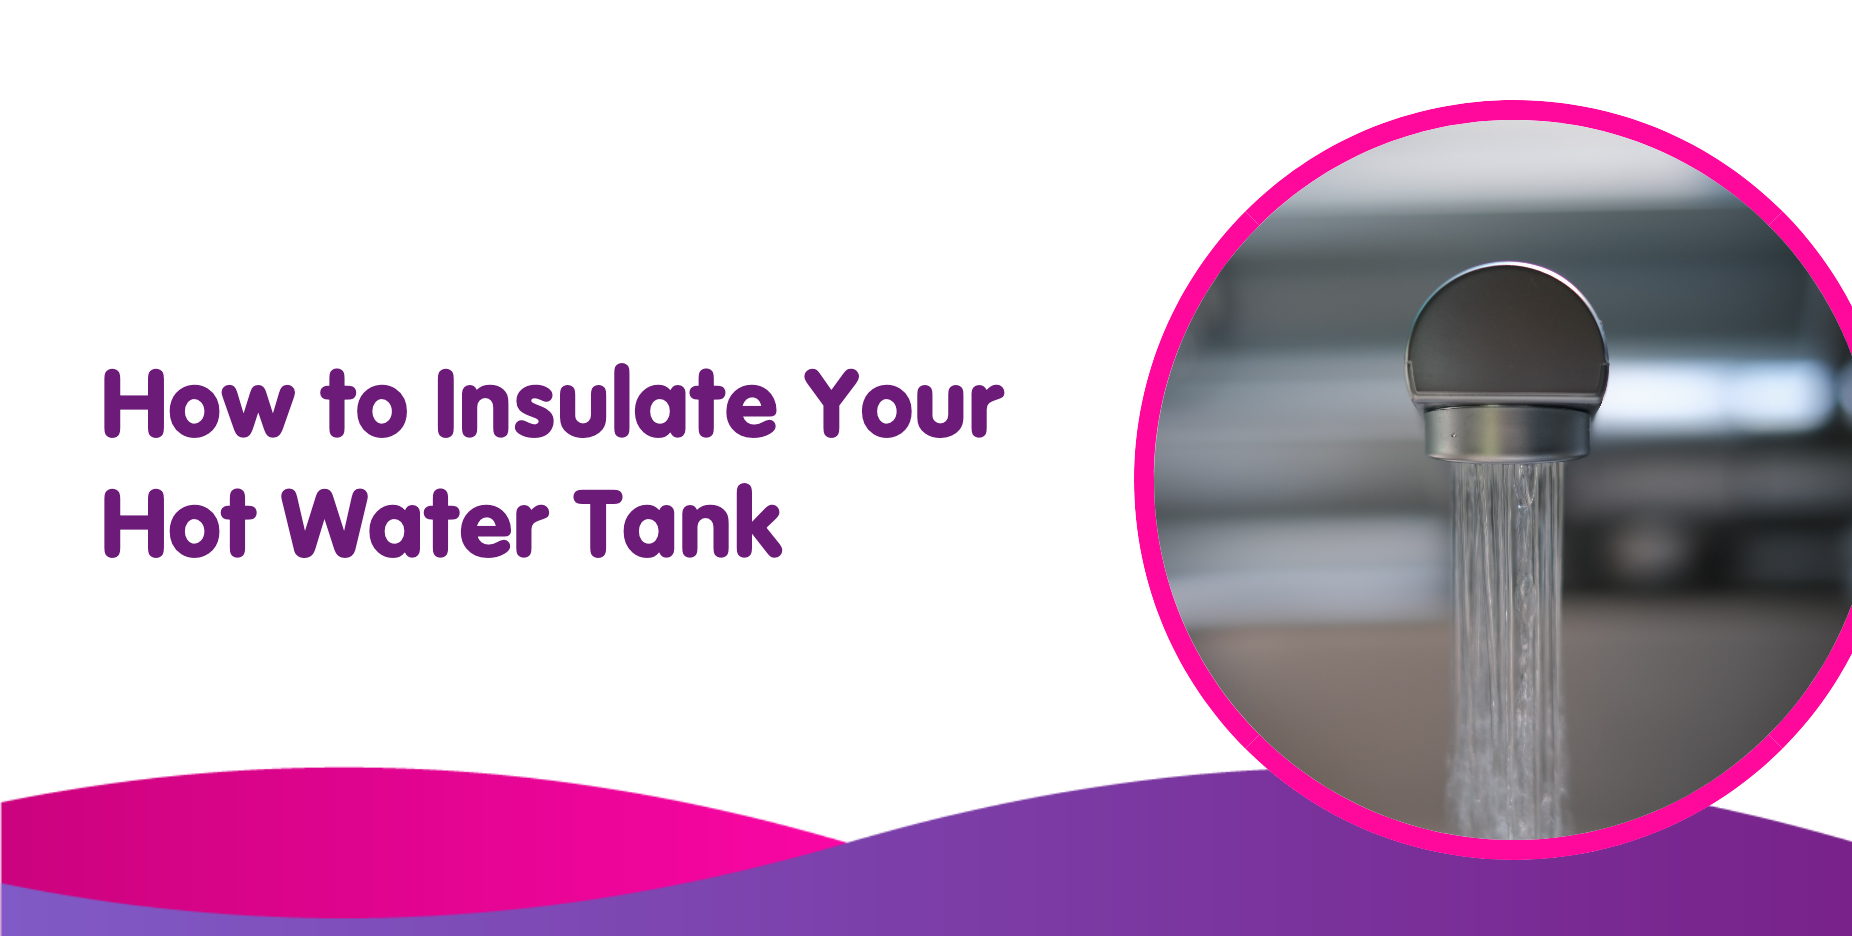 How to Insulate Your Hot Water Tank To Lower Energy Costs